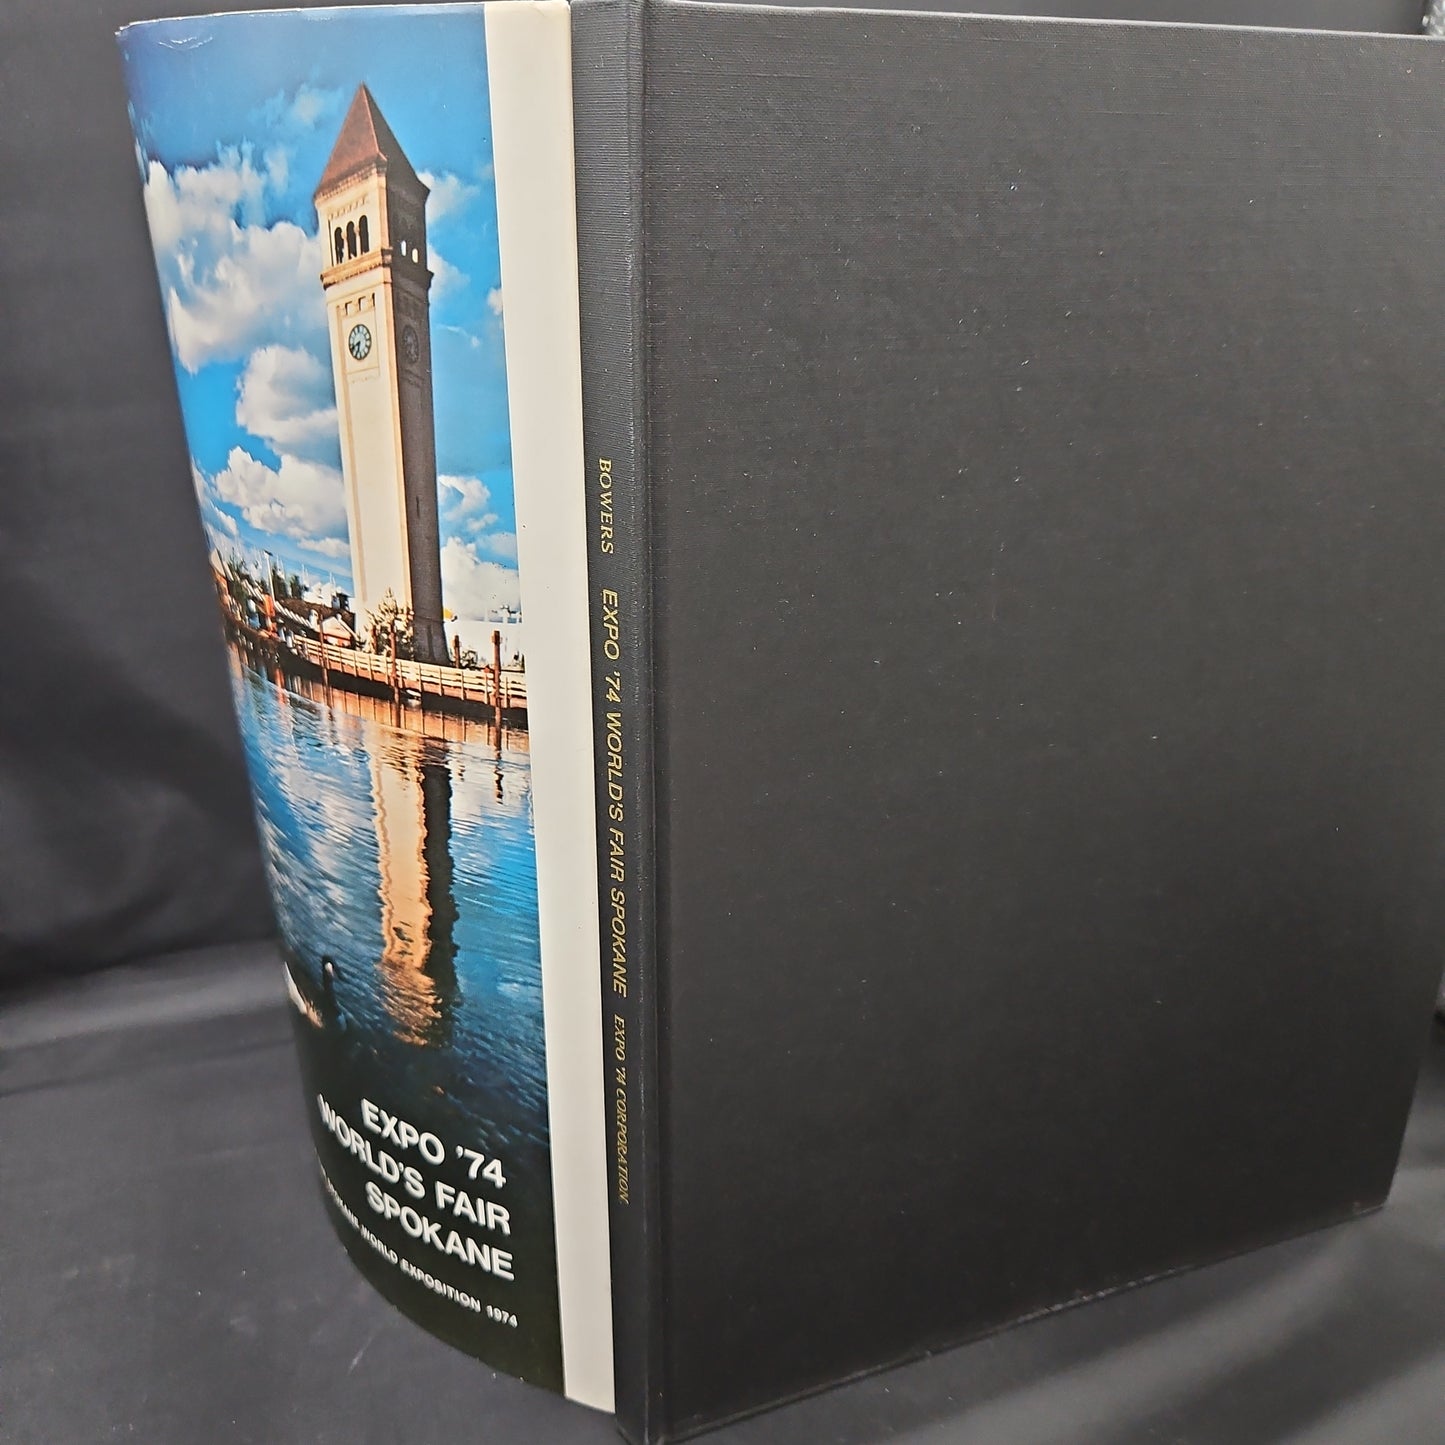 Original EXPO '74 Official Commemorative hardcover book New old stock